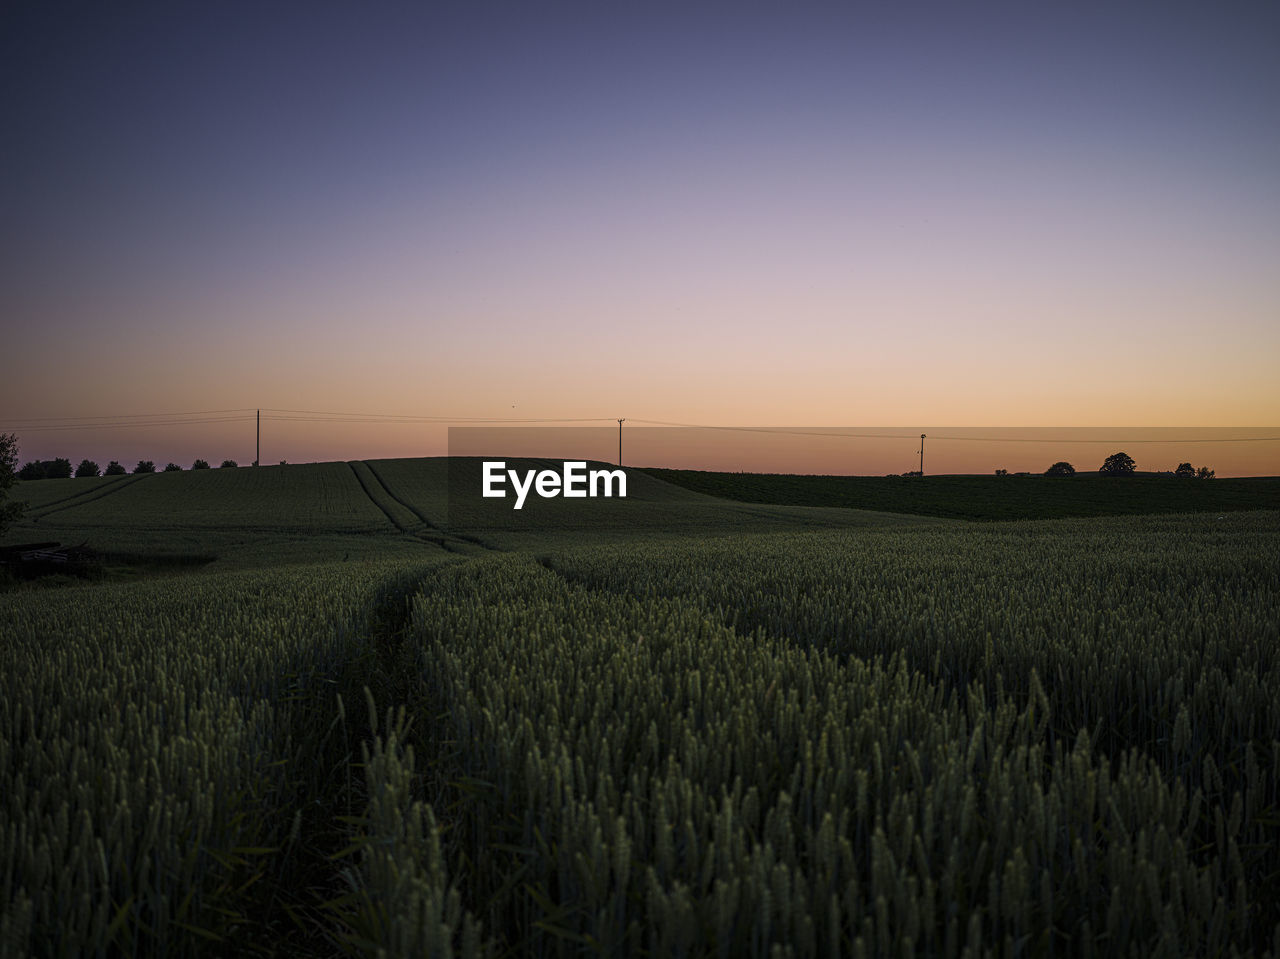 landscape, horizon, environment, field, sky, agriculture, land, rural scene, sunset, crop, plant, nature, beauty in nature, cereal plant, scenics - nature, dawn, farm, tranquility, growth, tranquil scene, no people, barley, plain, sunlight, food, horizon over land, evening, wheat, idyllic, outdoors, sun, twilight, grass, cloud, environmental conservation, clear sky, urban skyline, blue, corn, non-urban scene, prairie, rural area, orange color, summer, food and drink